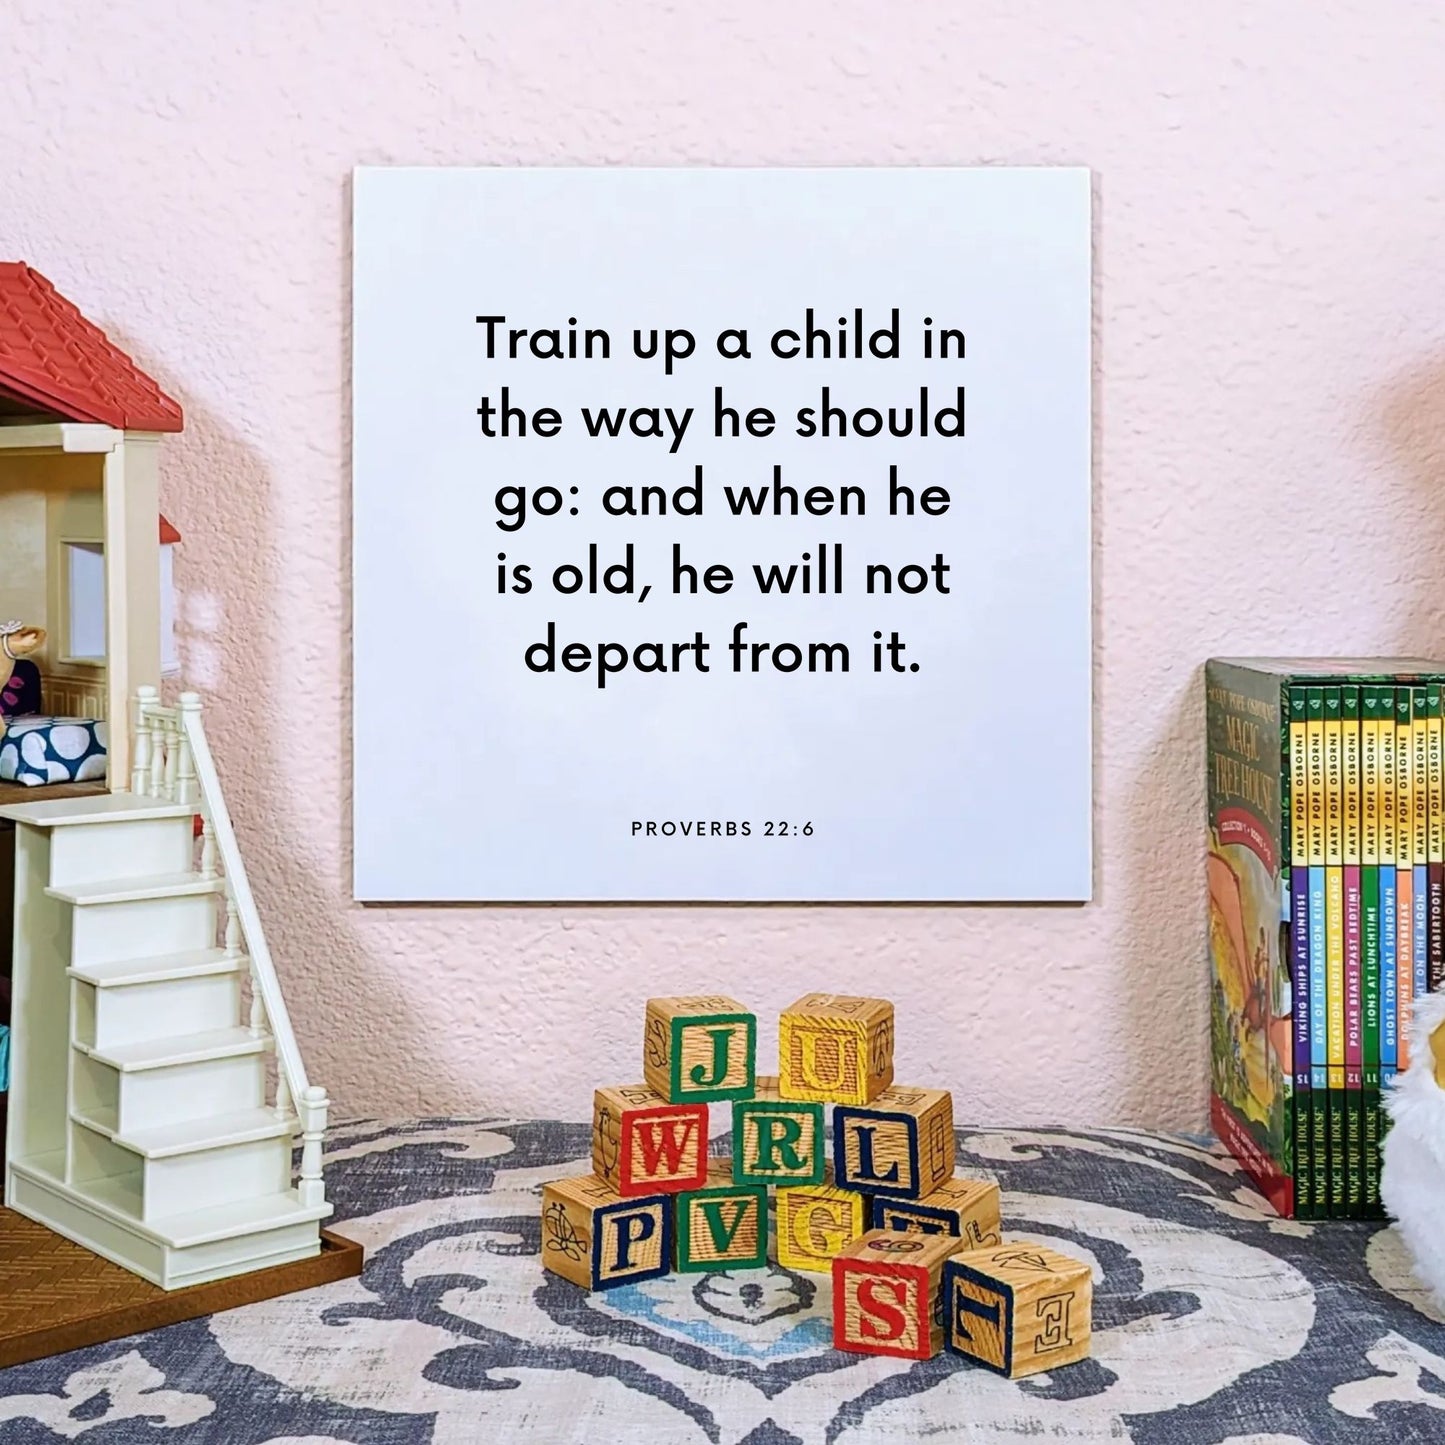 Playroom mouting of the scripture tile for Proverbs 22:6 - "Train up a child in the way he should go"